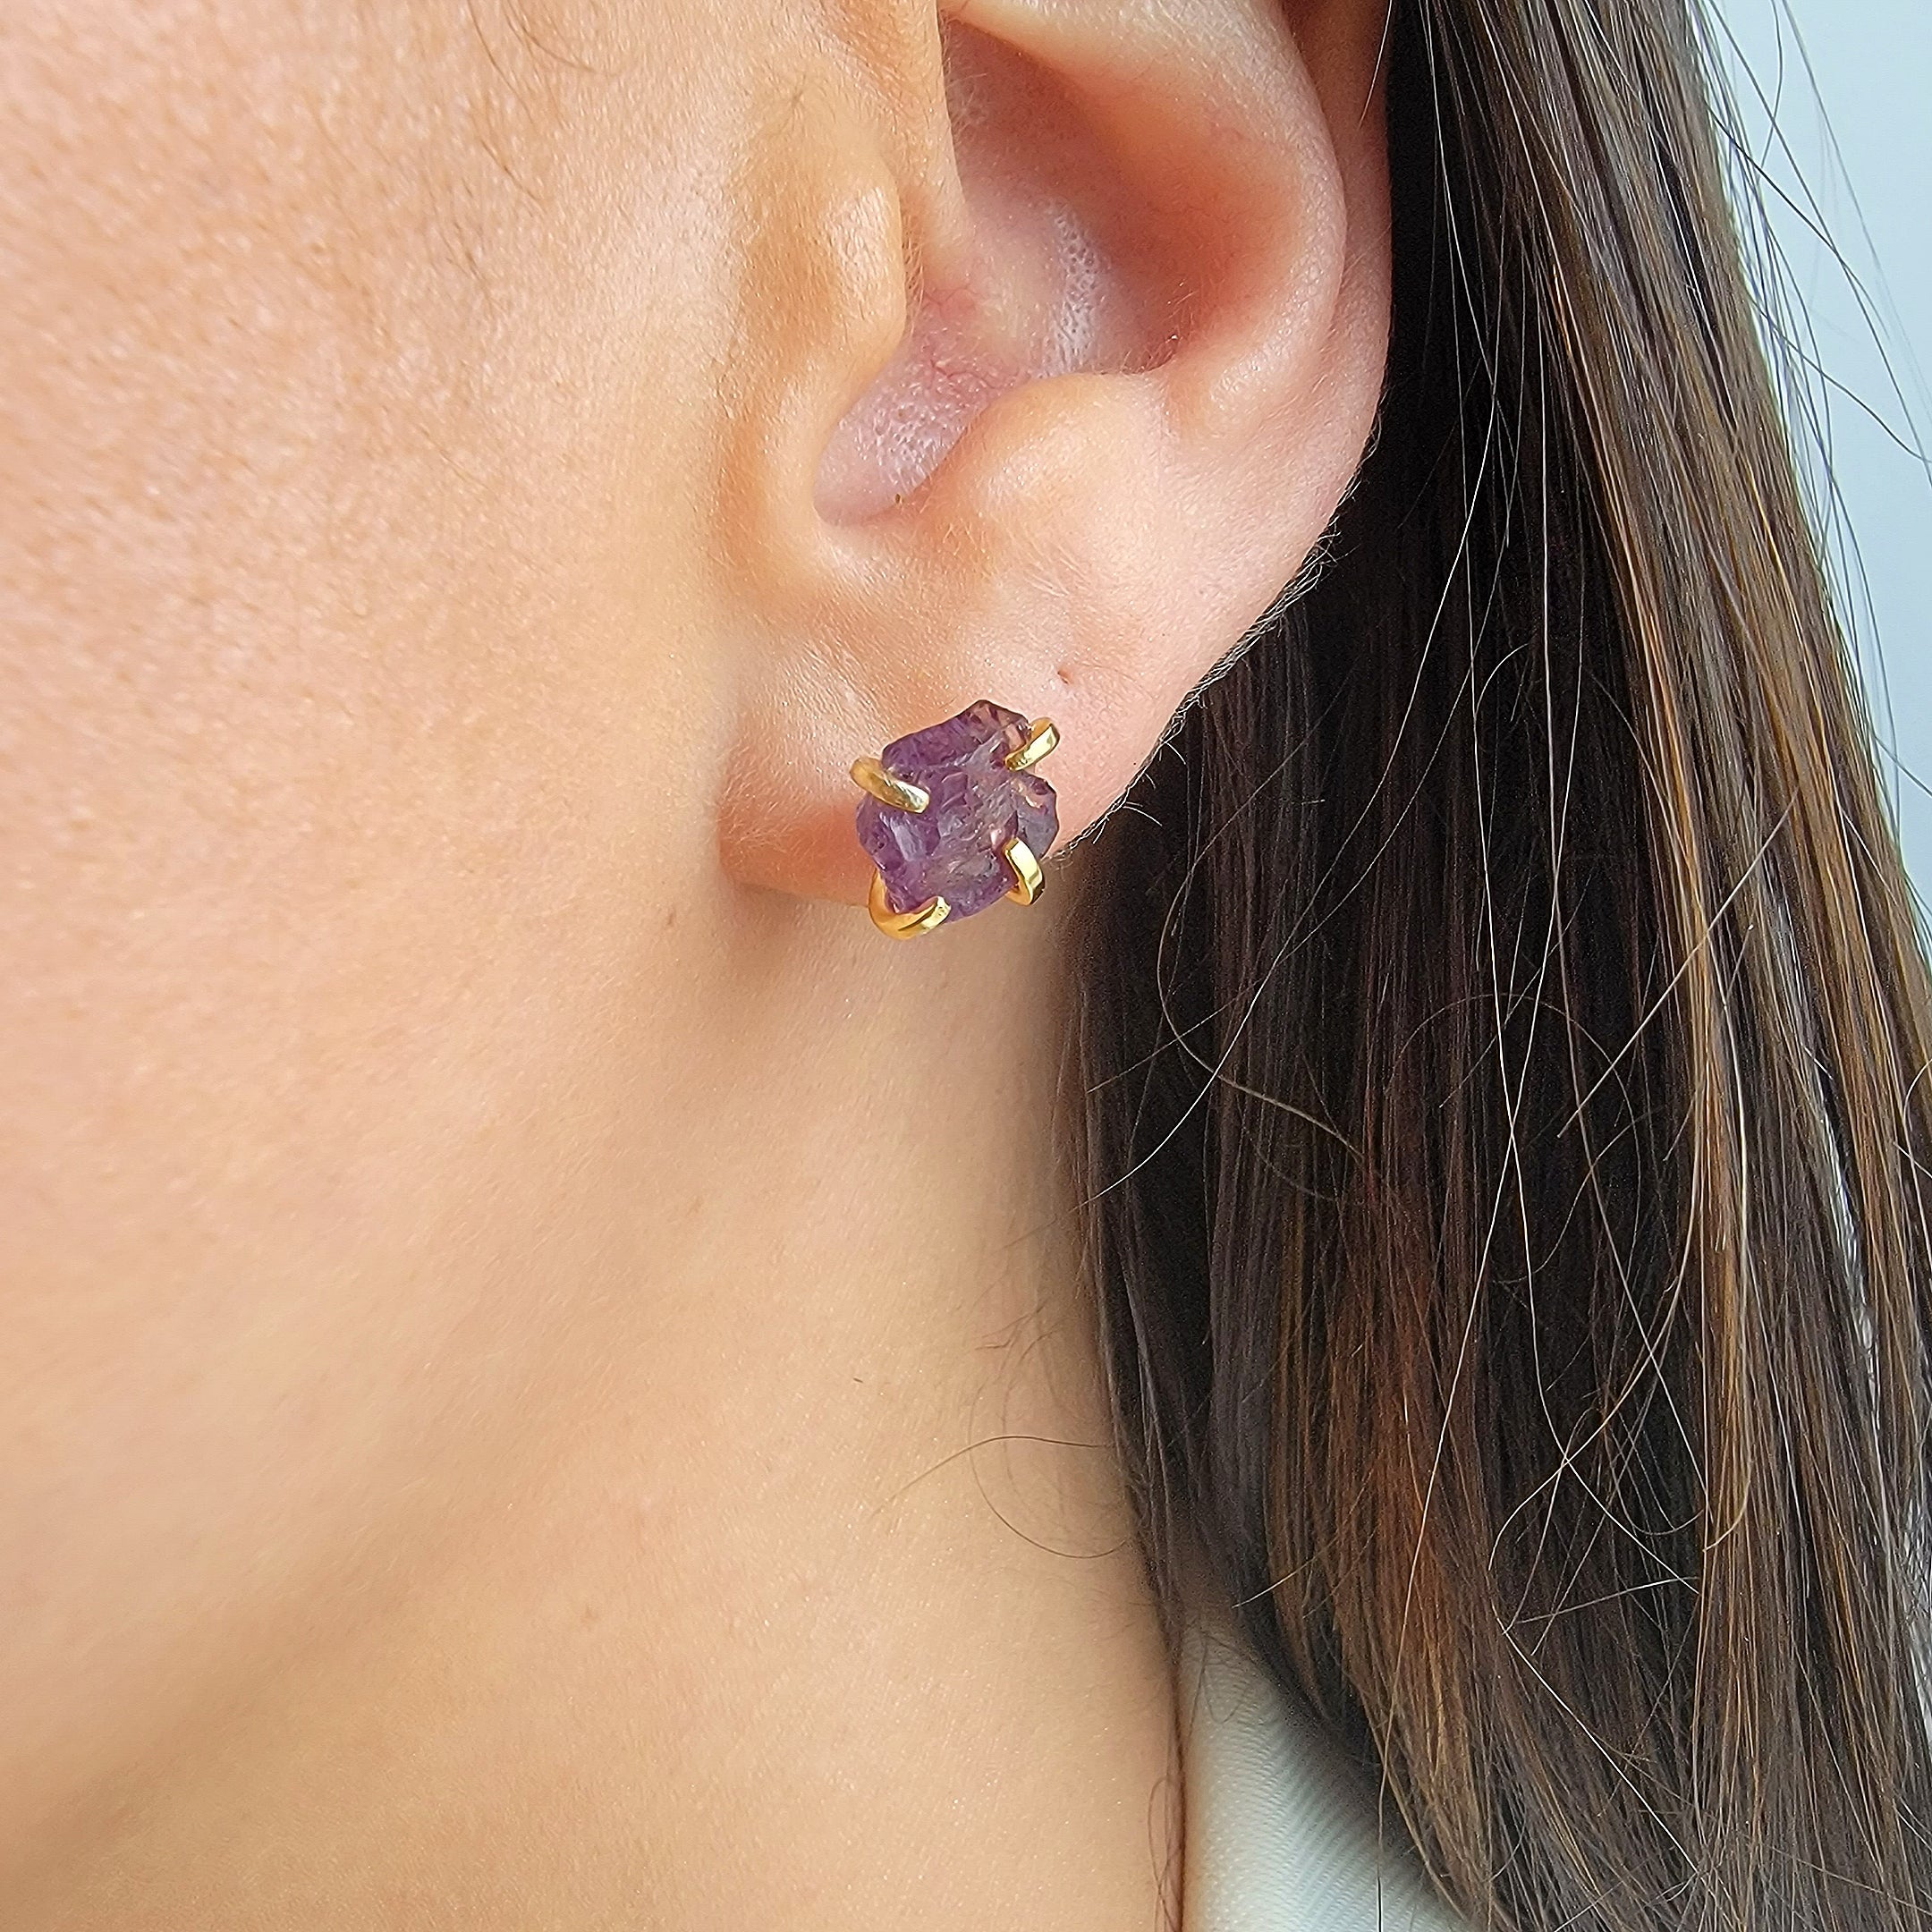 Antique Alexandrite Earrings  19 For Sale at 1stDibs  natural alexandrite  earrings alexandrite earrings for sale real alexandrite earrings